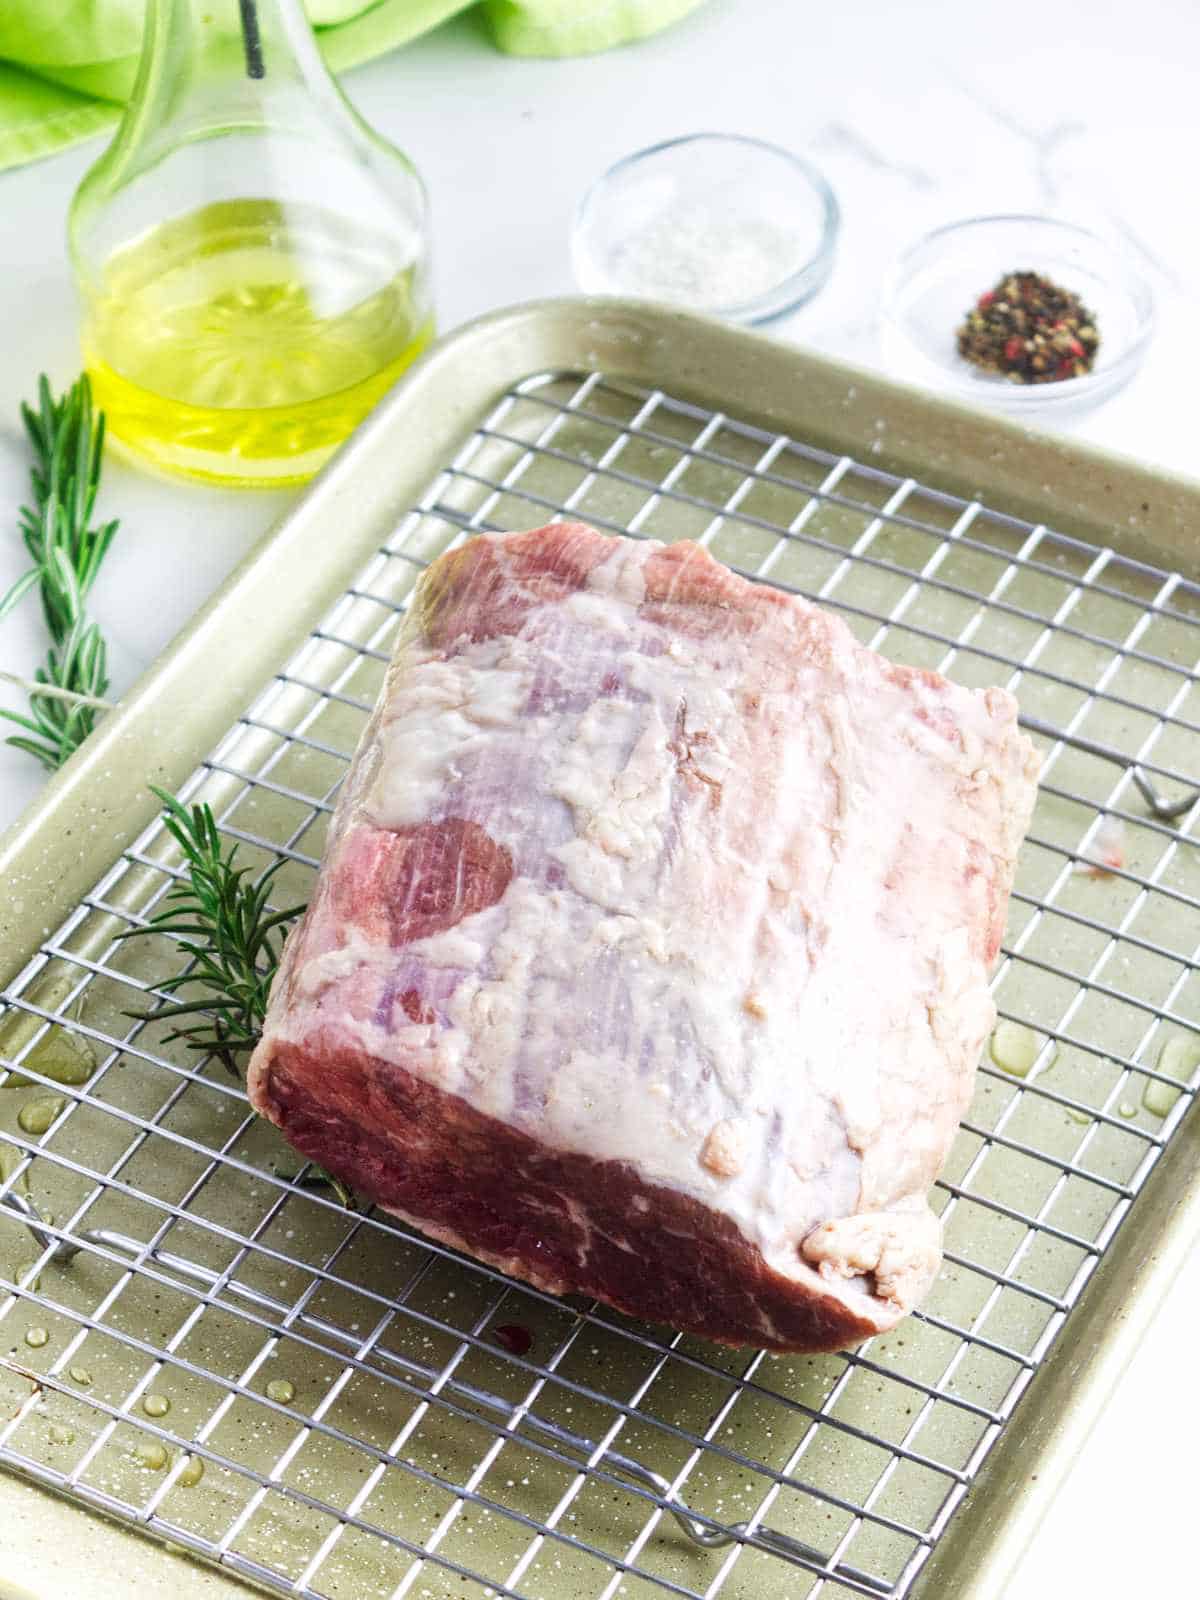 beef roast, olive oil, salt, peppercorns, and rosemary on a white background.